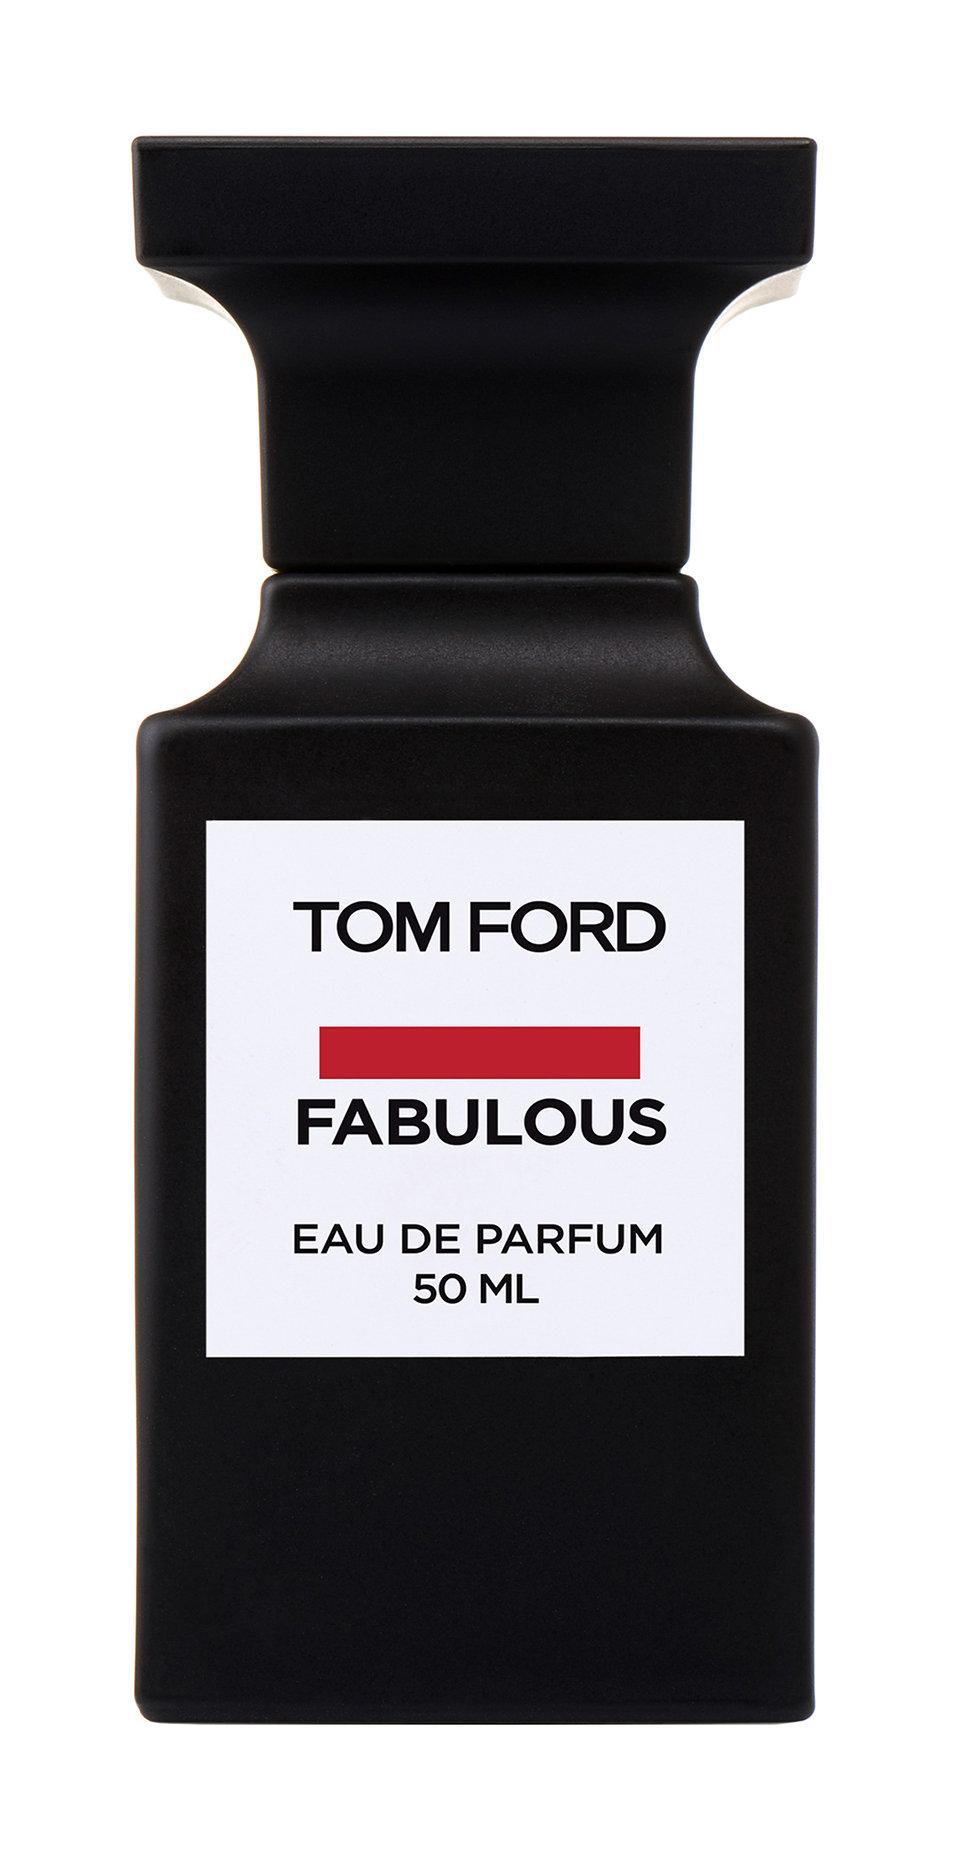 Парфюмерная вода Tom Ford Fabulous Eau De Parfum, 50 мл yiqixin 40 80 bit remote car key for ford mondeo c max s max focus fiesta 2010 2011 2012 433mhz 3 buttons 4d63 4d60 chip fob